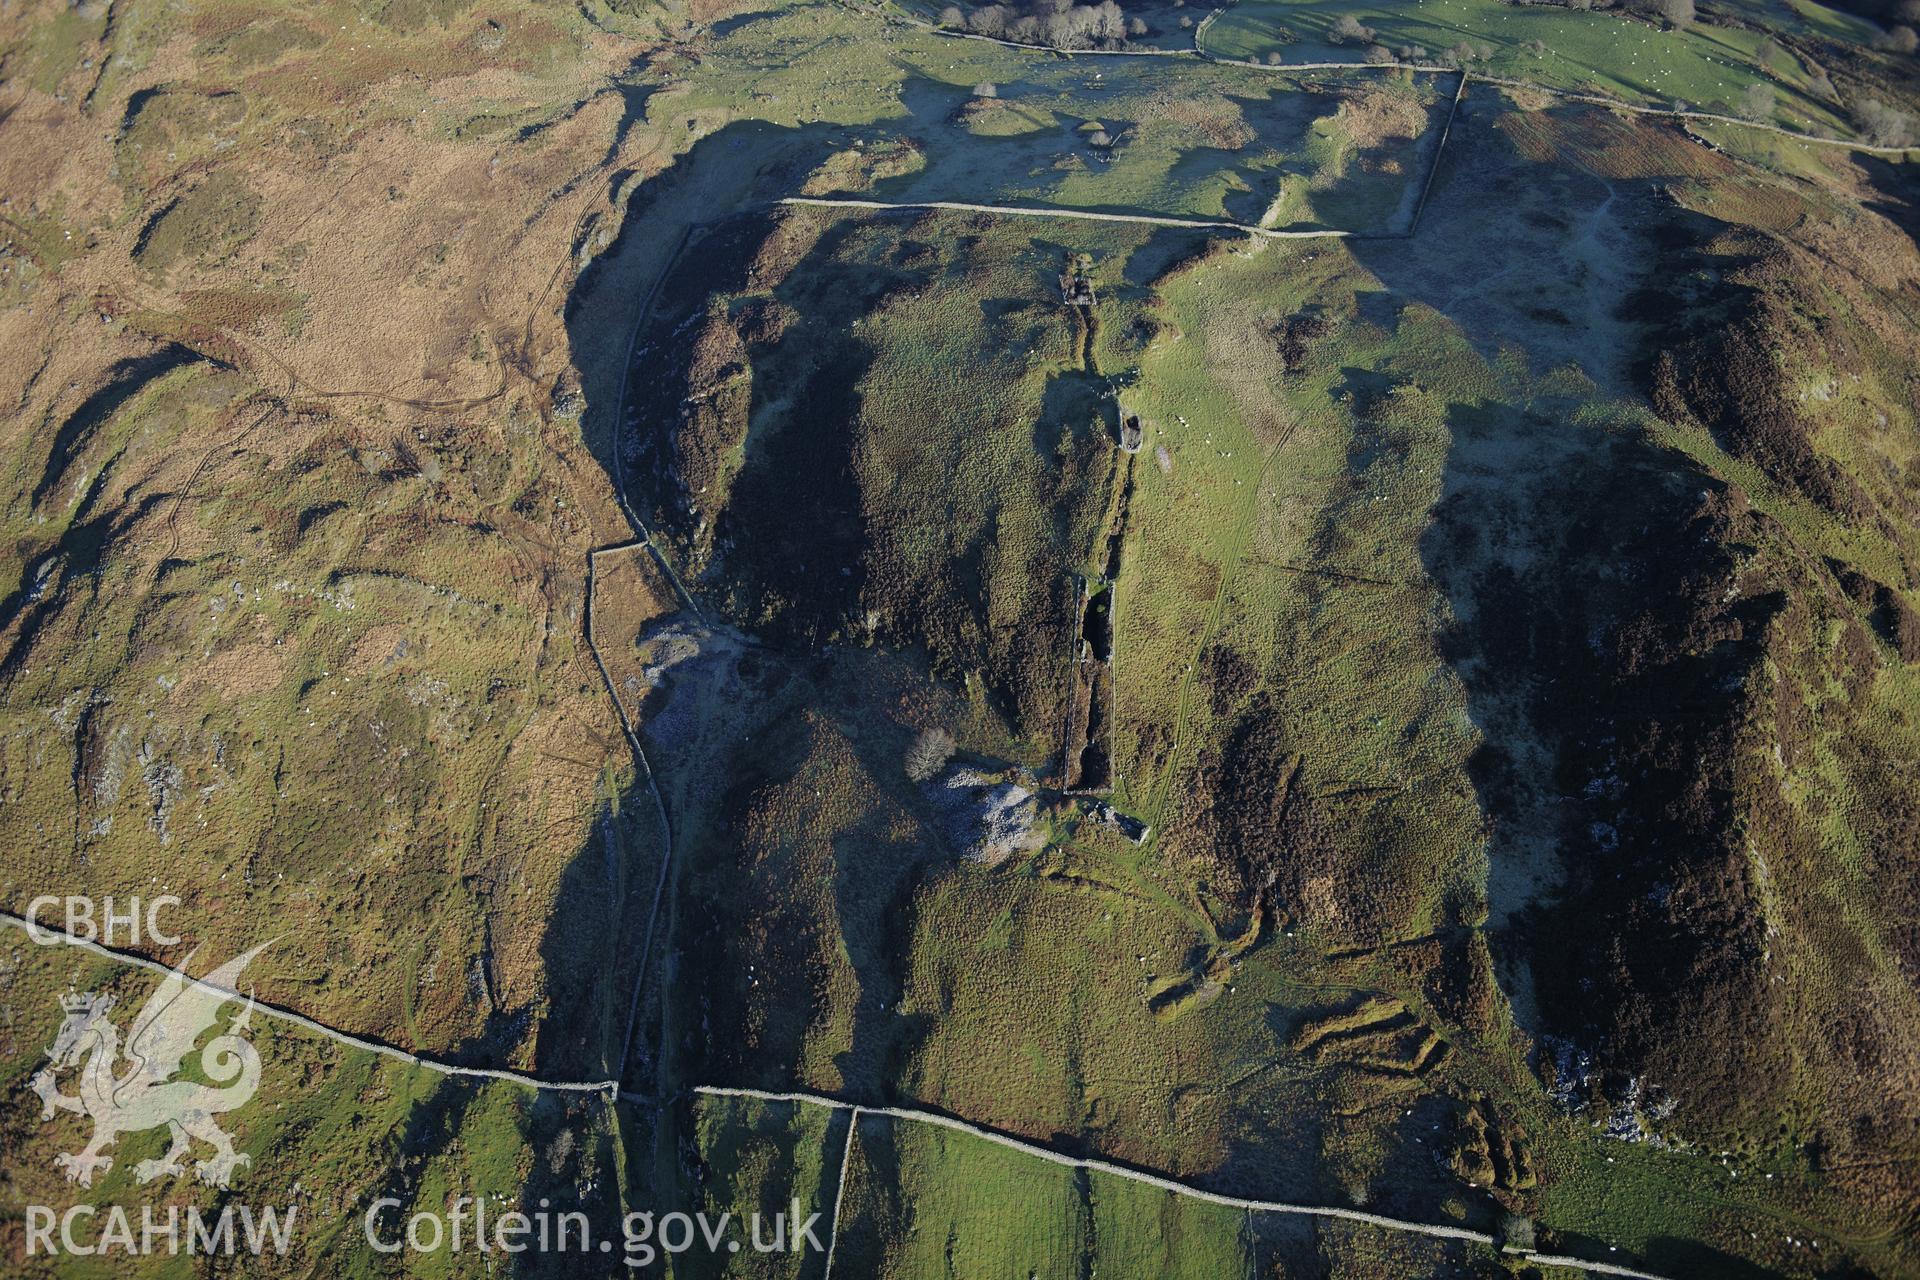 RCAHMW colour oblique photograph of Clogau gold mine. Taken by Toby Driver on 10/12/2012.